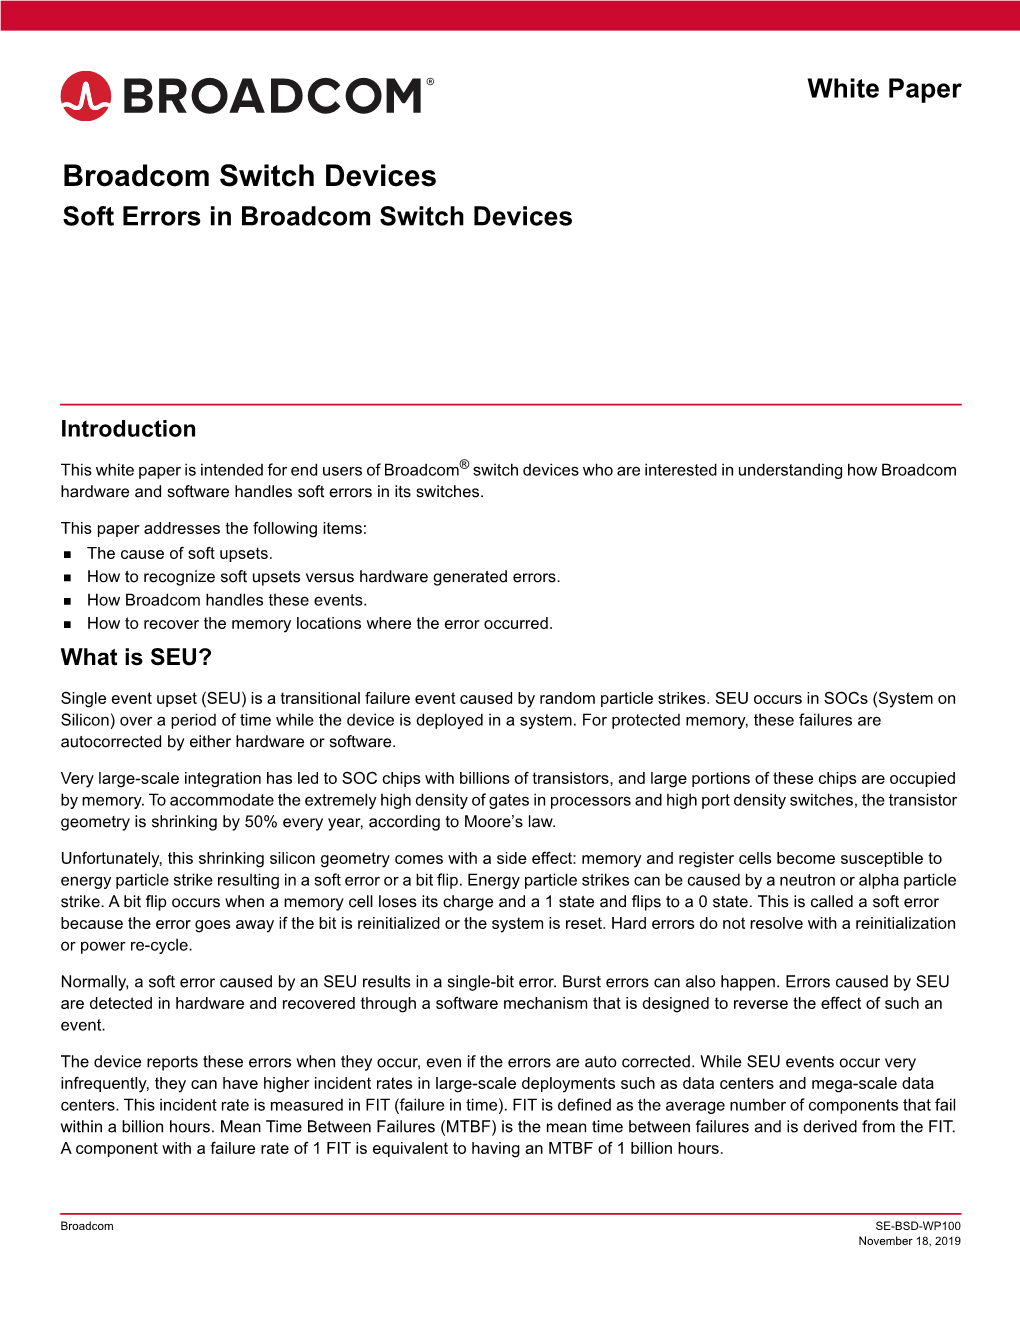 Soft Errors in Broadcom Switch Devices